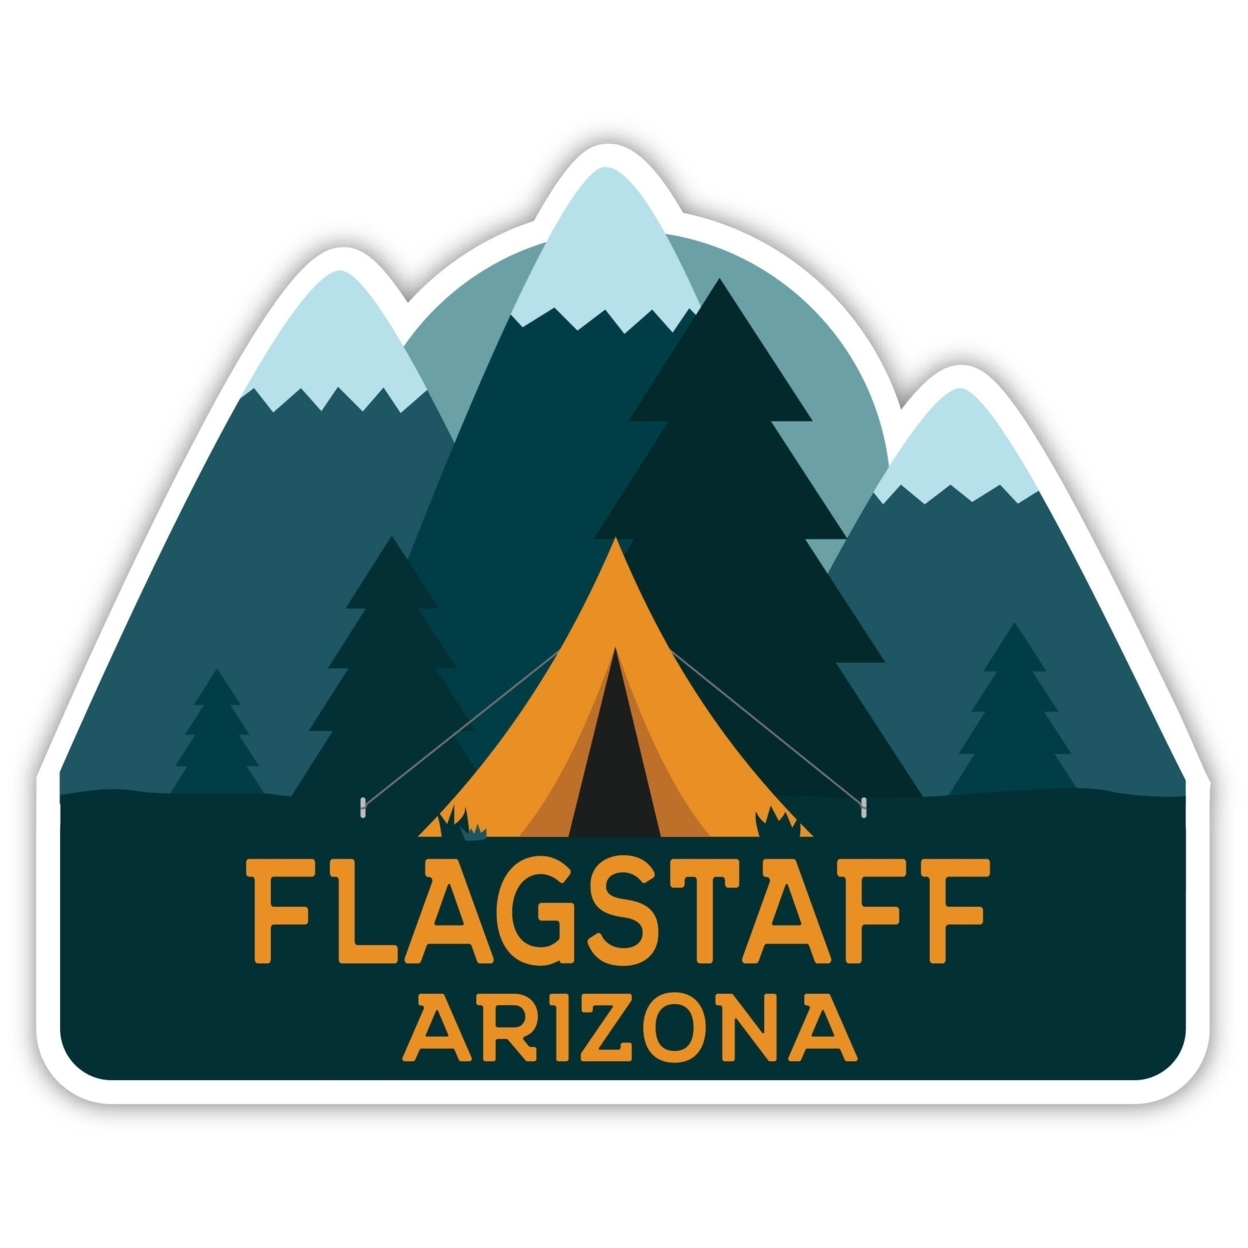 Flagstaff Arizona Souvenir Decorative Stickers (Choose Theme And Size) - 4-Pack, 4-Inch, Great Outdoors